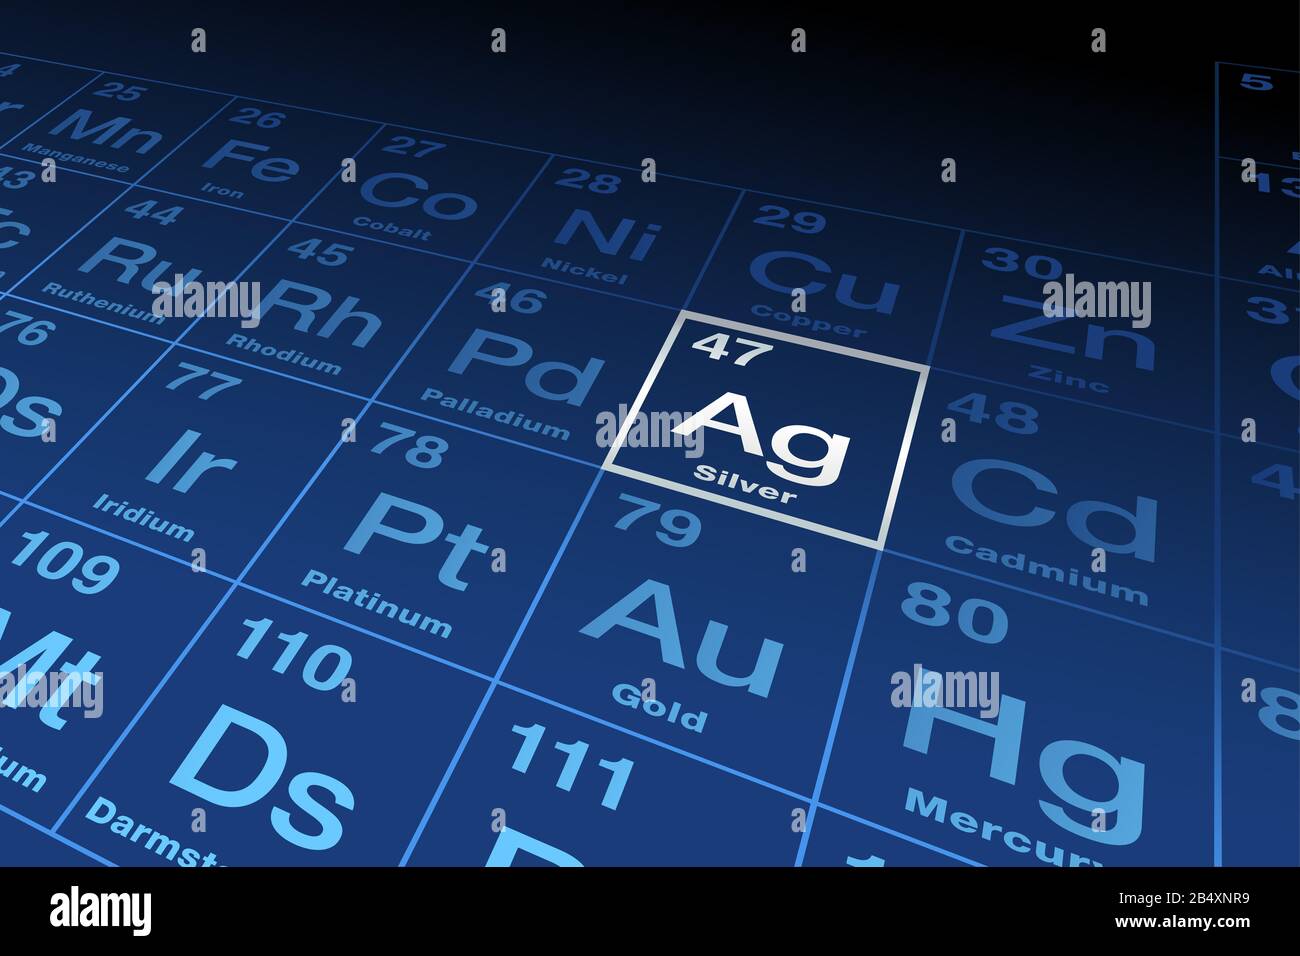 Element silver on the periodic table of elements. Chemical element with Latin name argentum, symbol Ag and atomic number 47, a transition metal. Stock Photo